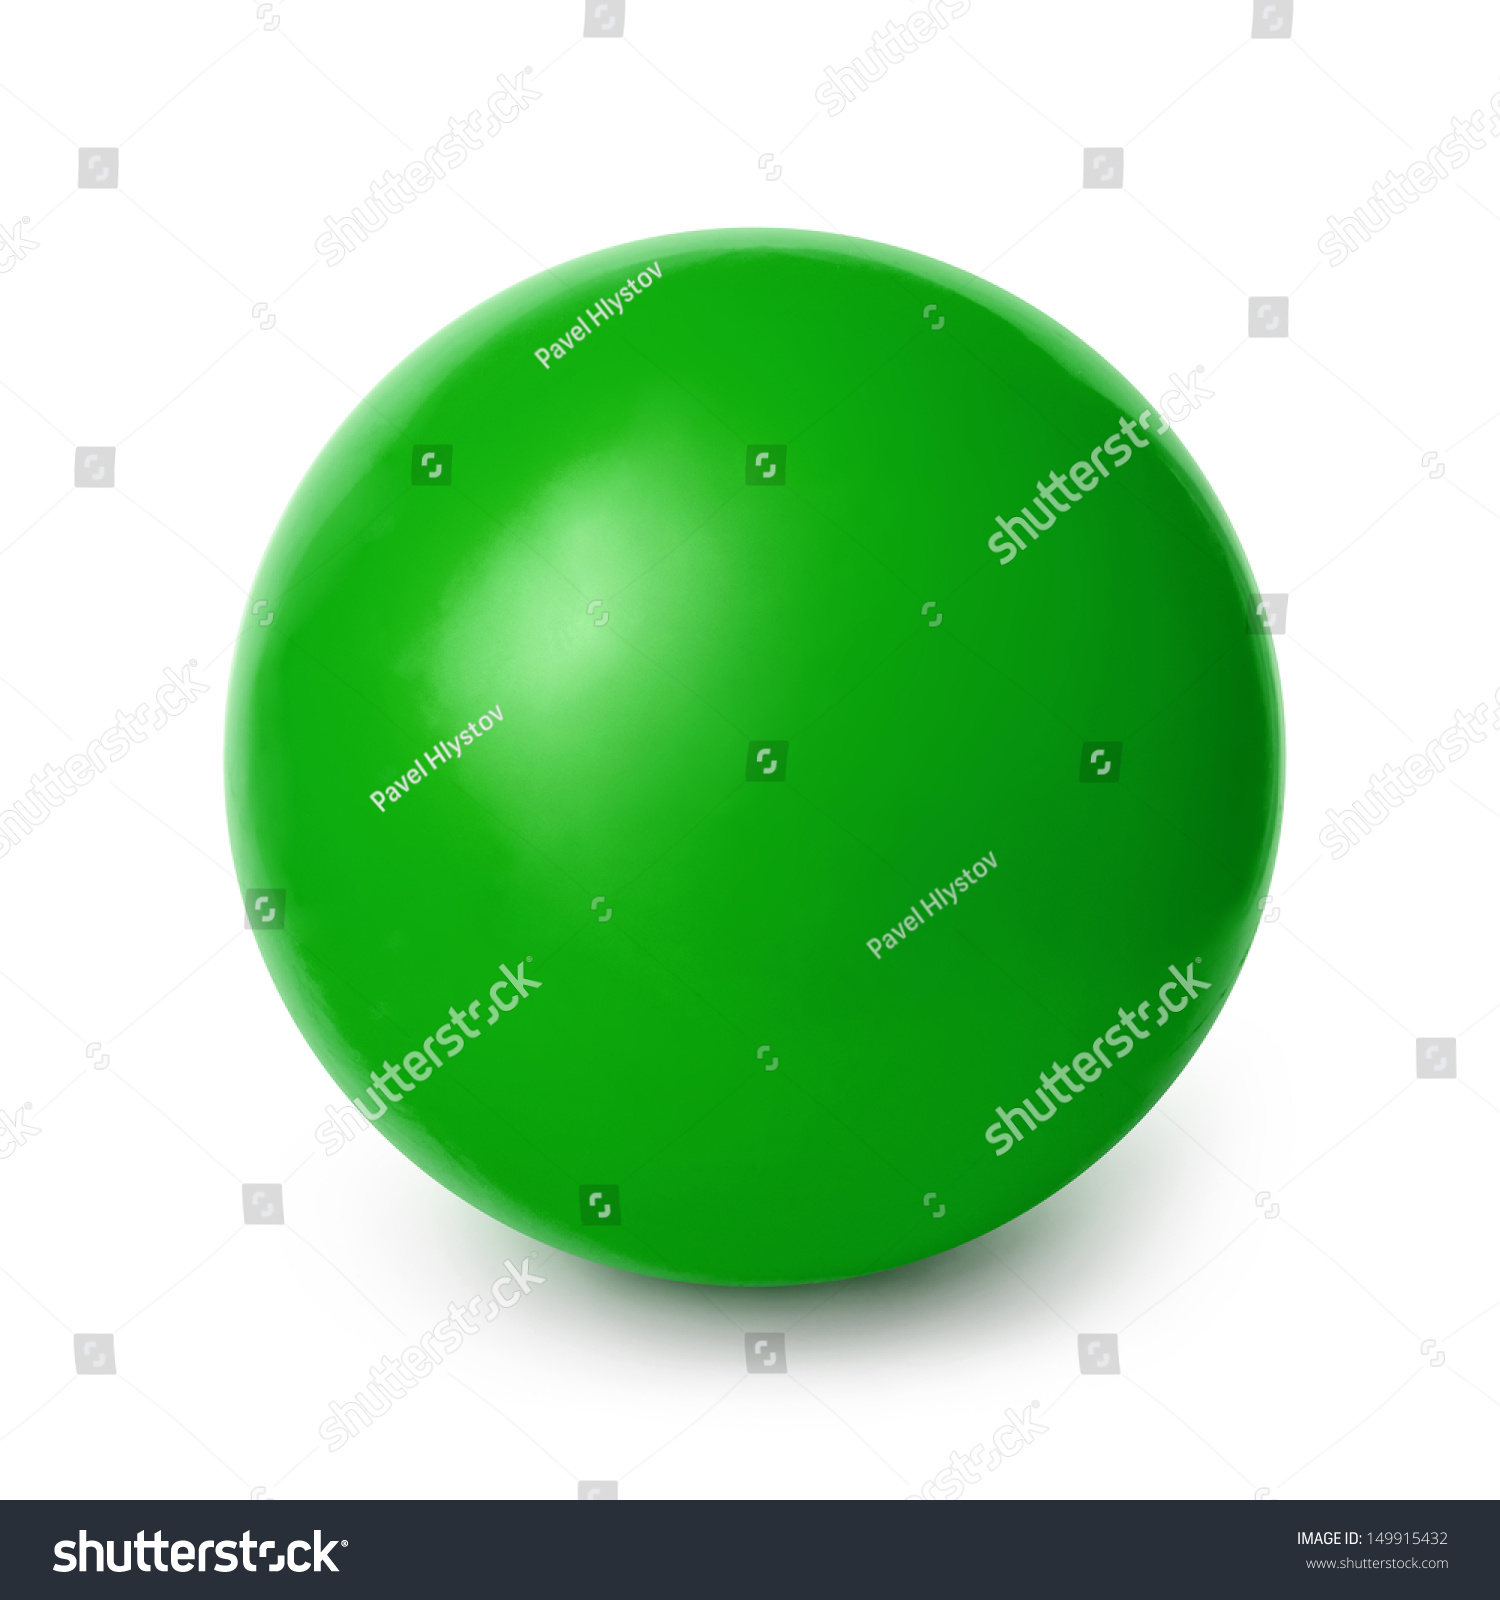 Green Ball isolated on a White background with clipping path #149915432